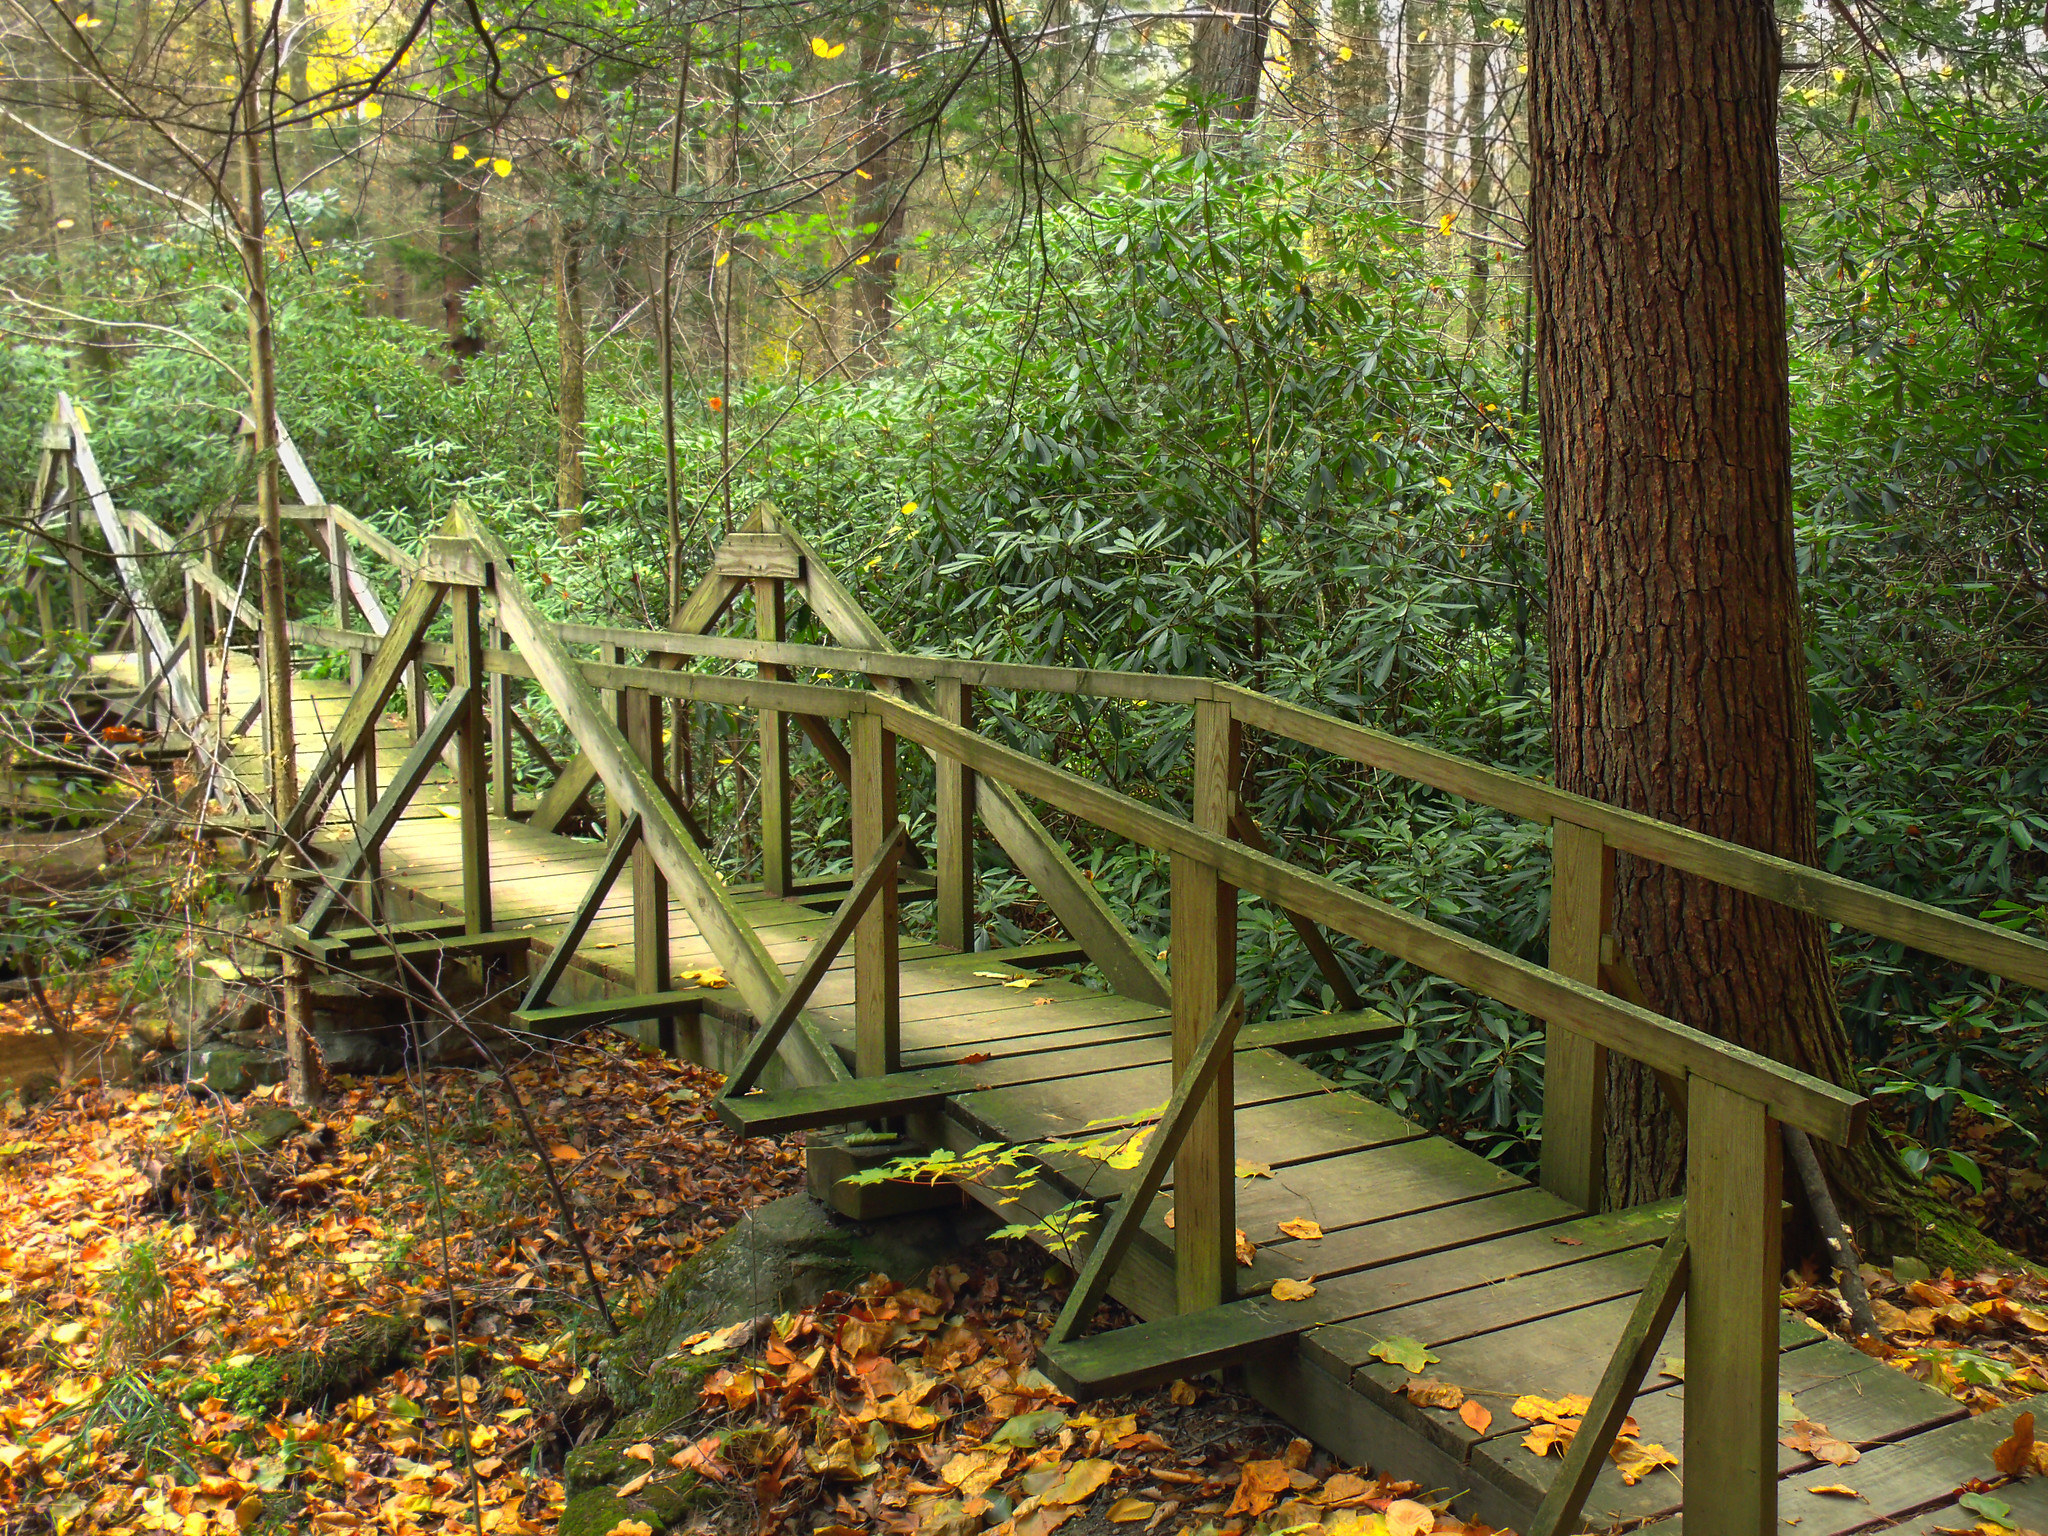 A wooden footbridge surrounded by trees and autumn leaves that have fallen on the ground